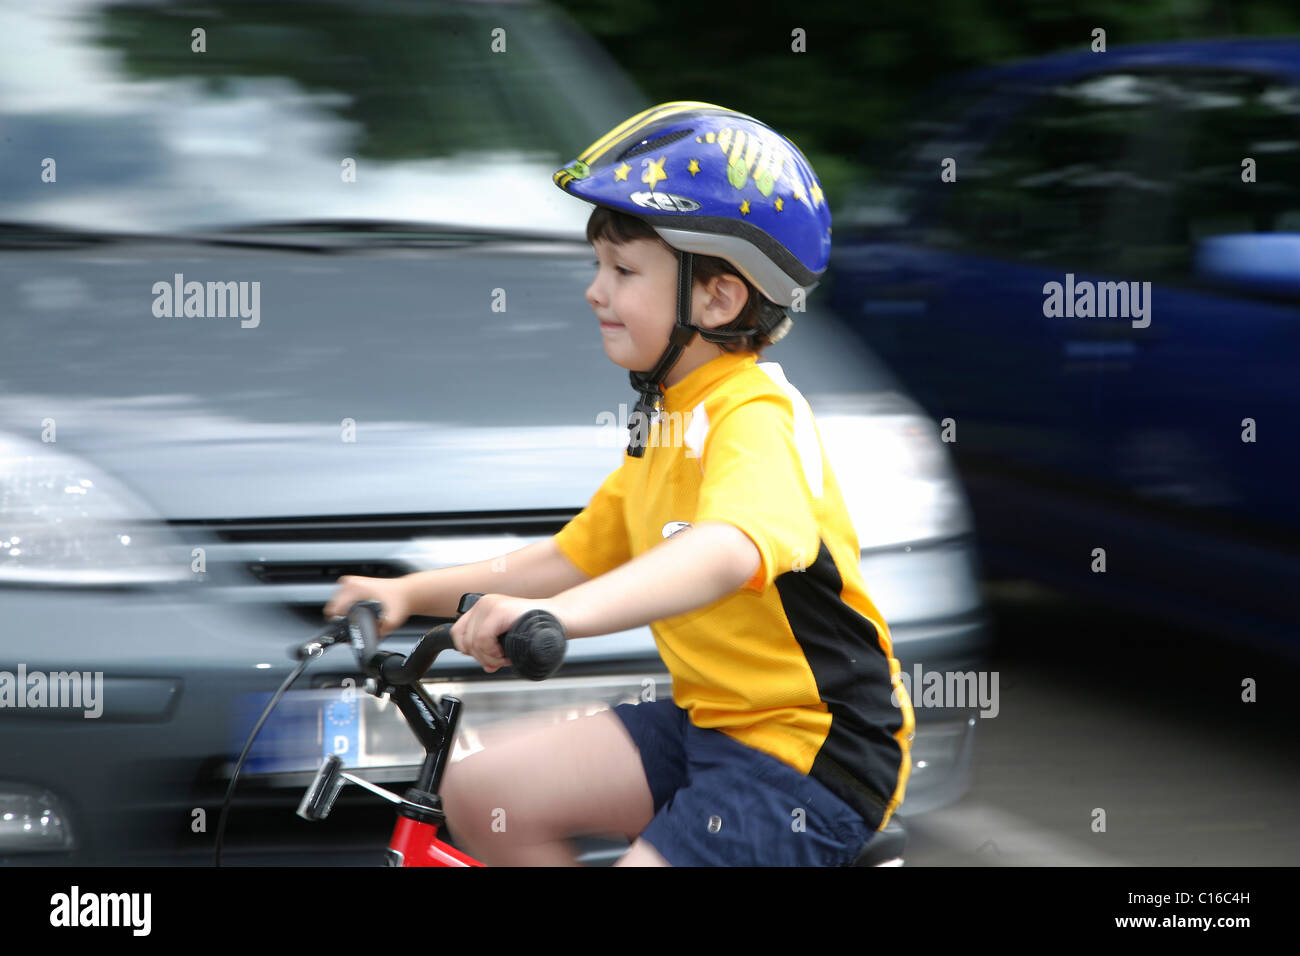 Five-year-old boy wearing a bicycle helmet riding a bike Stock Photo